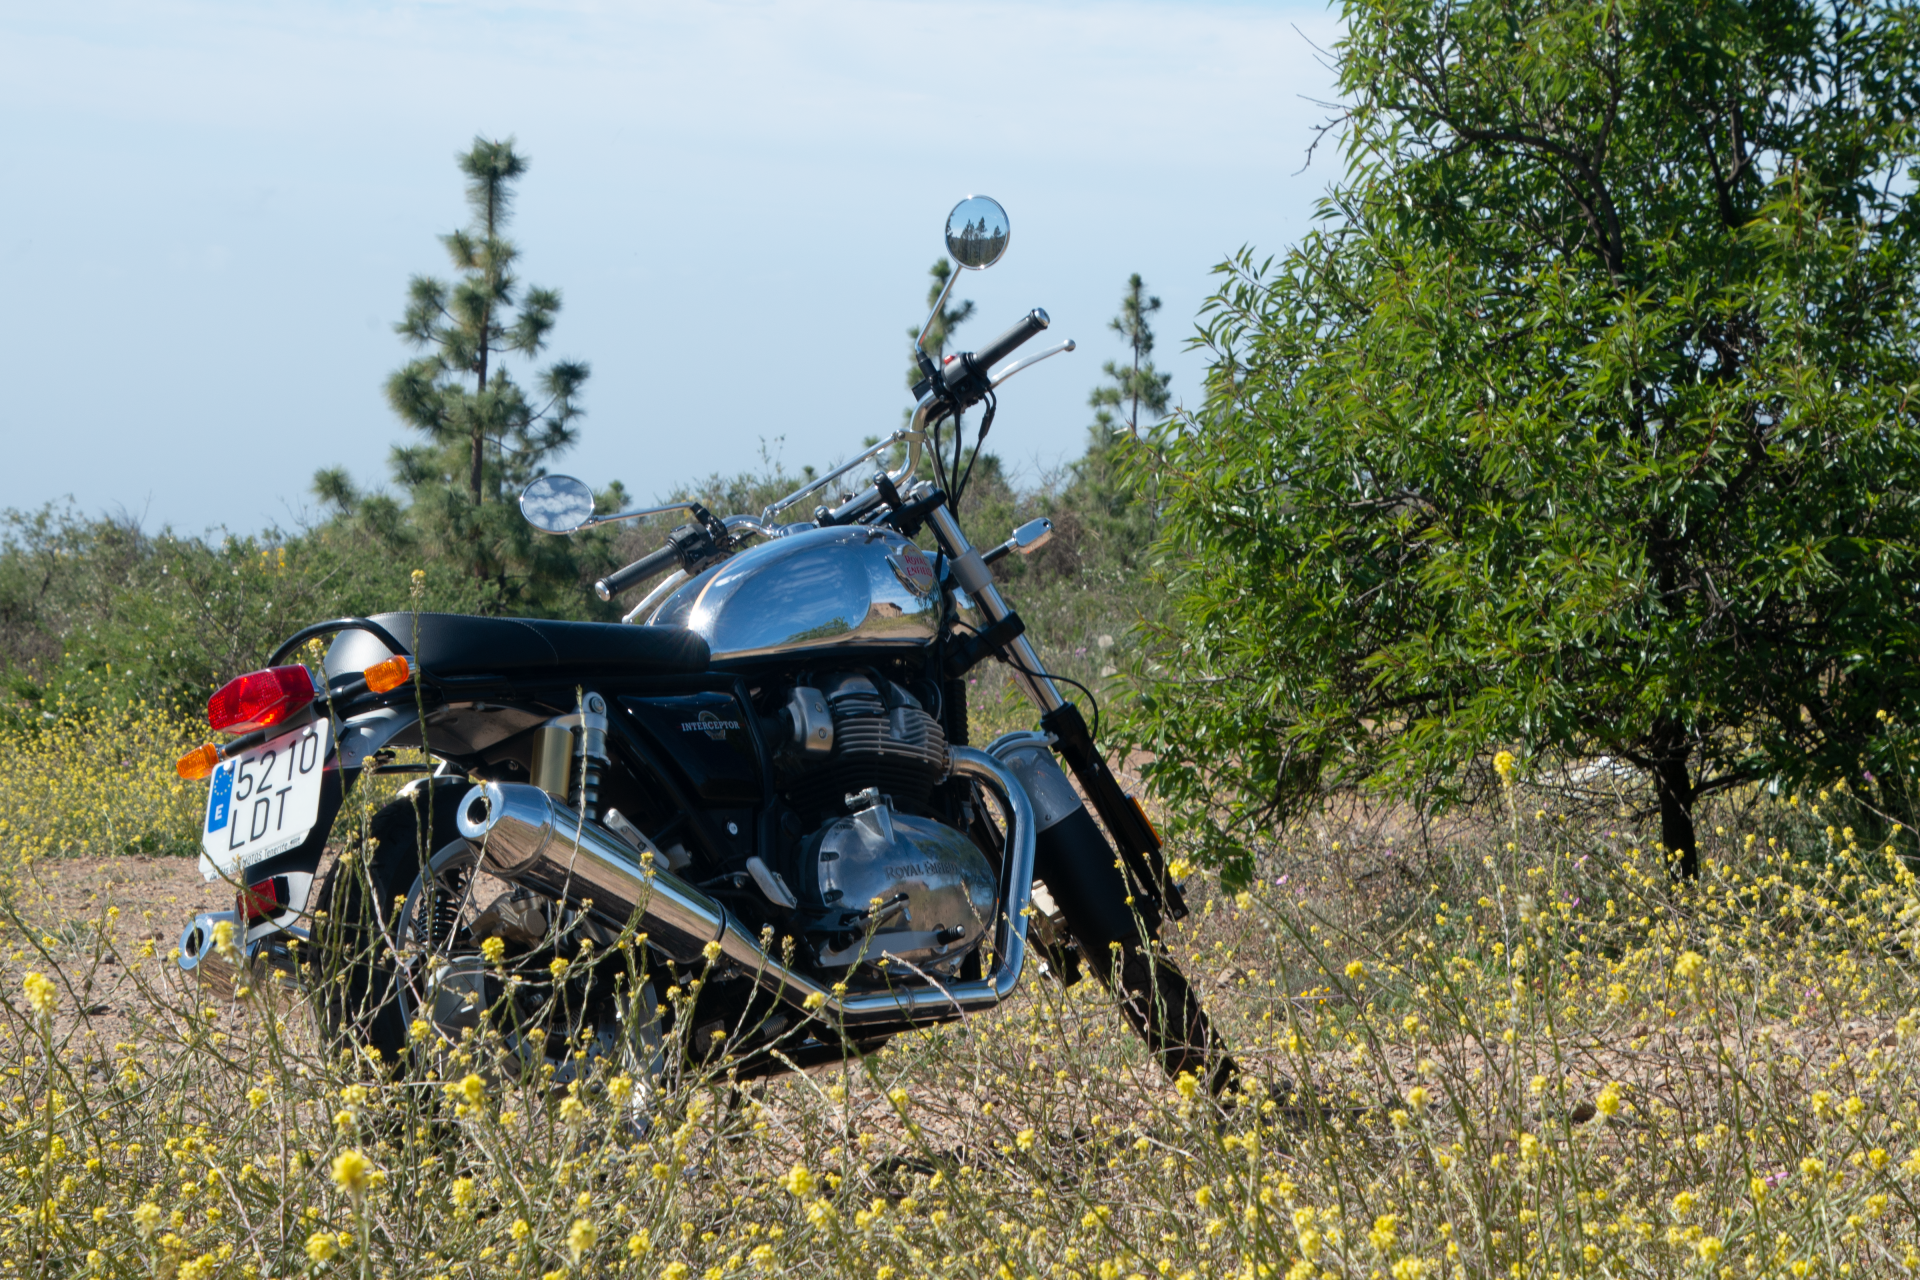 Royal Enfield for rent in tenerife.